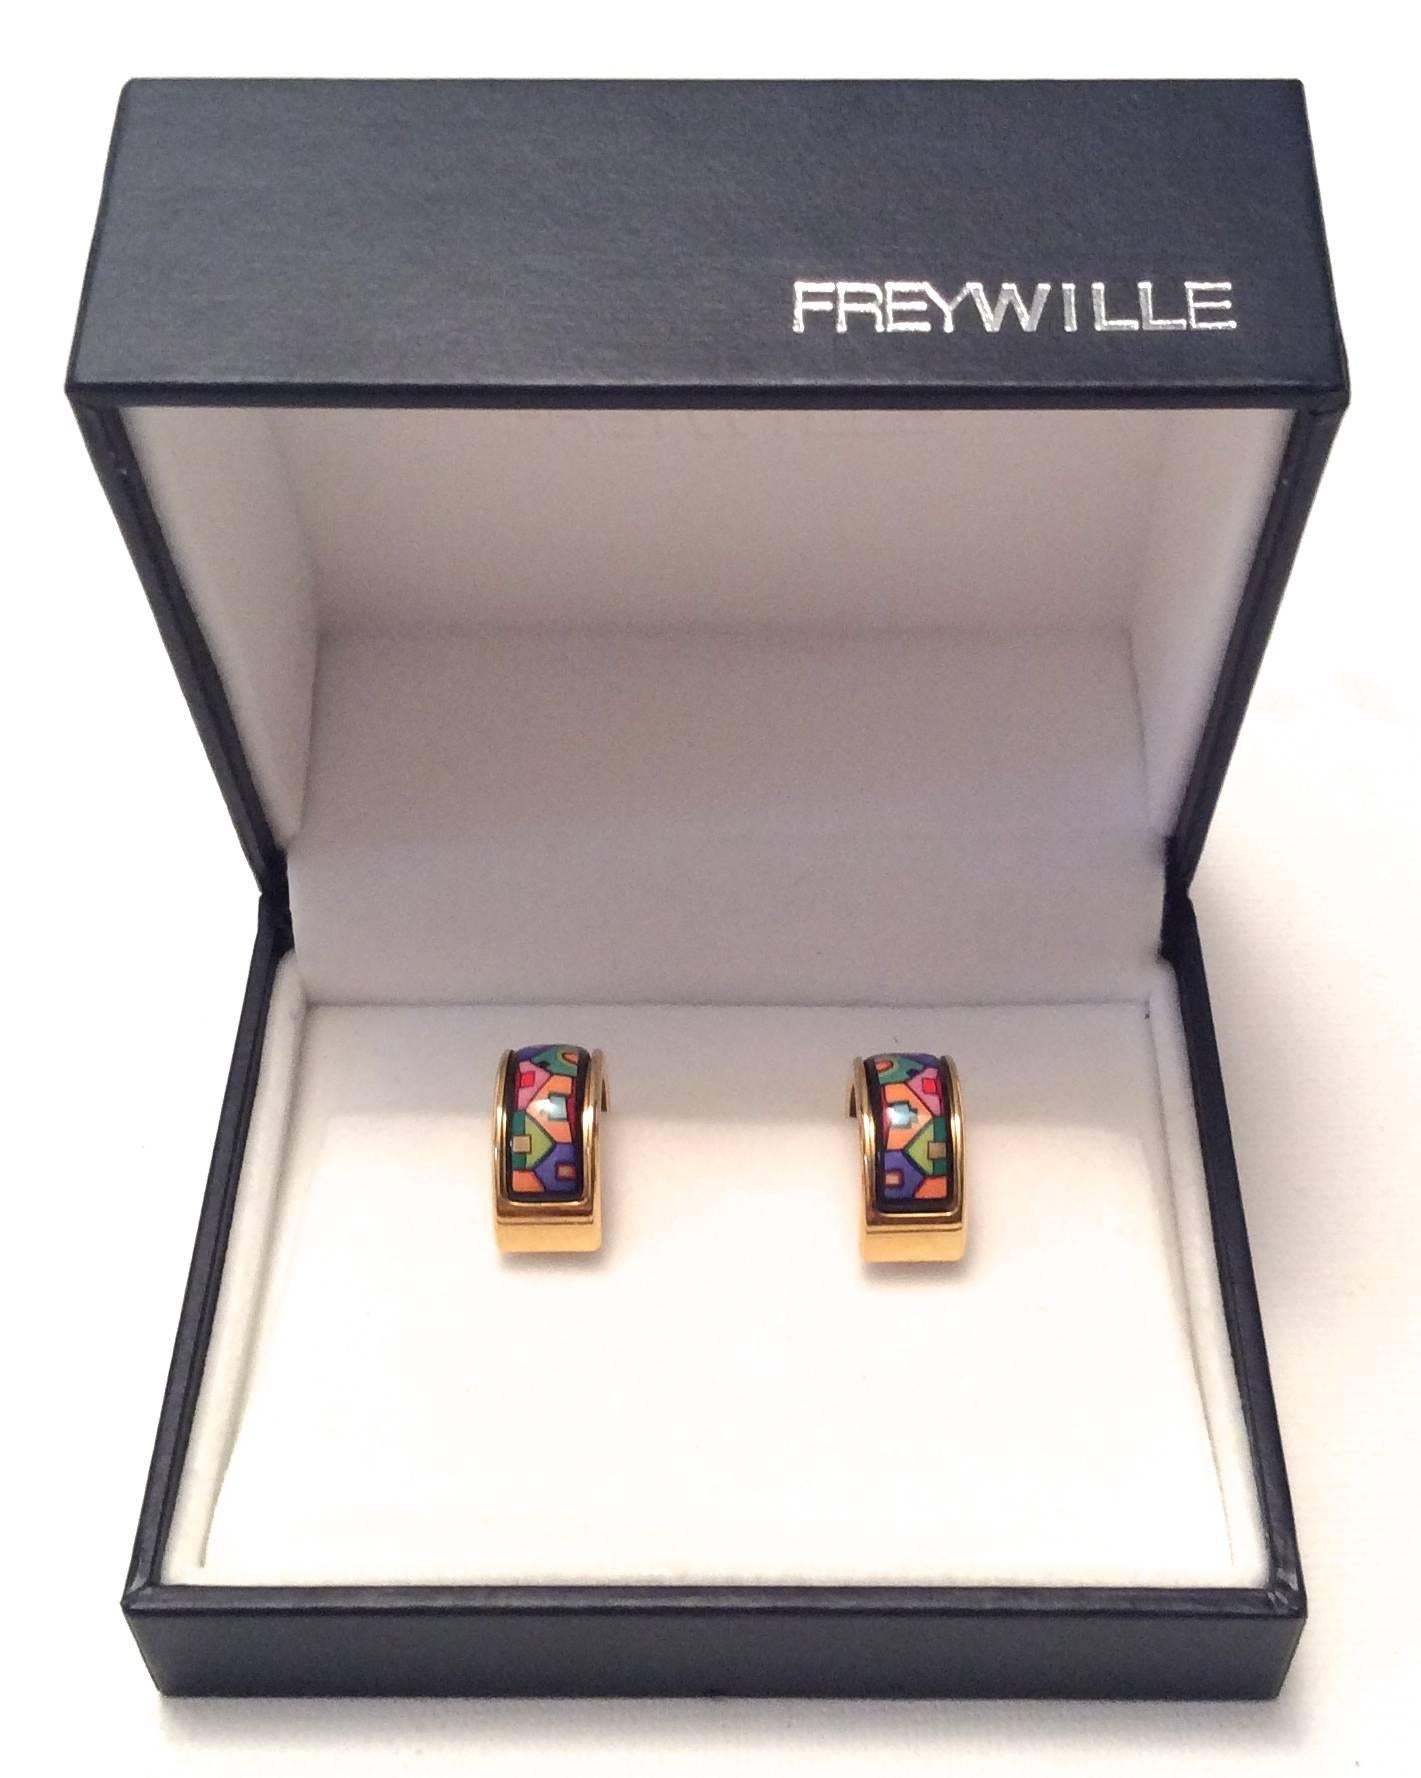 This beautiful Freywille set comprises a new pair of gold tone enamel pierced earrings in the beautiful variation after Hundertwasser / 905 Red River Streets Pattern. The gold tone piereced earrings measure 3/4 of an inch high and half an inch wide.